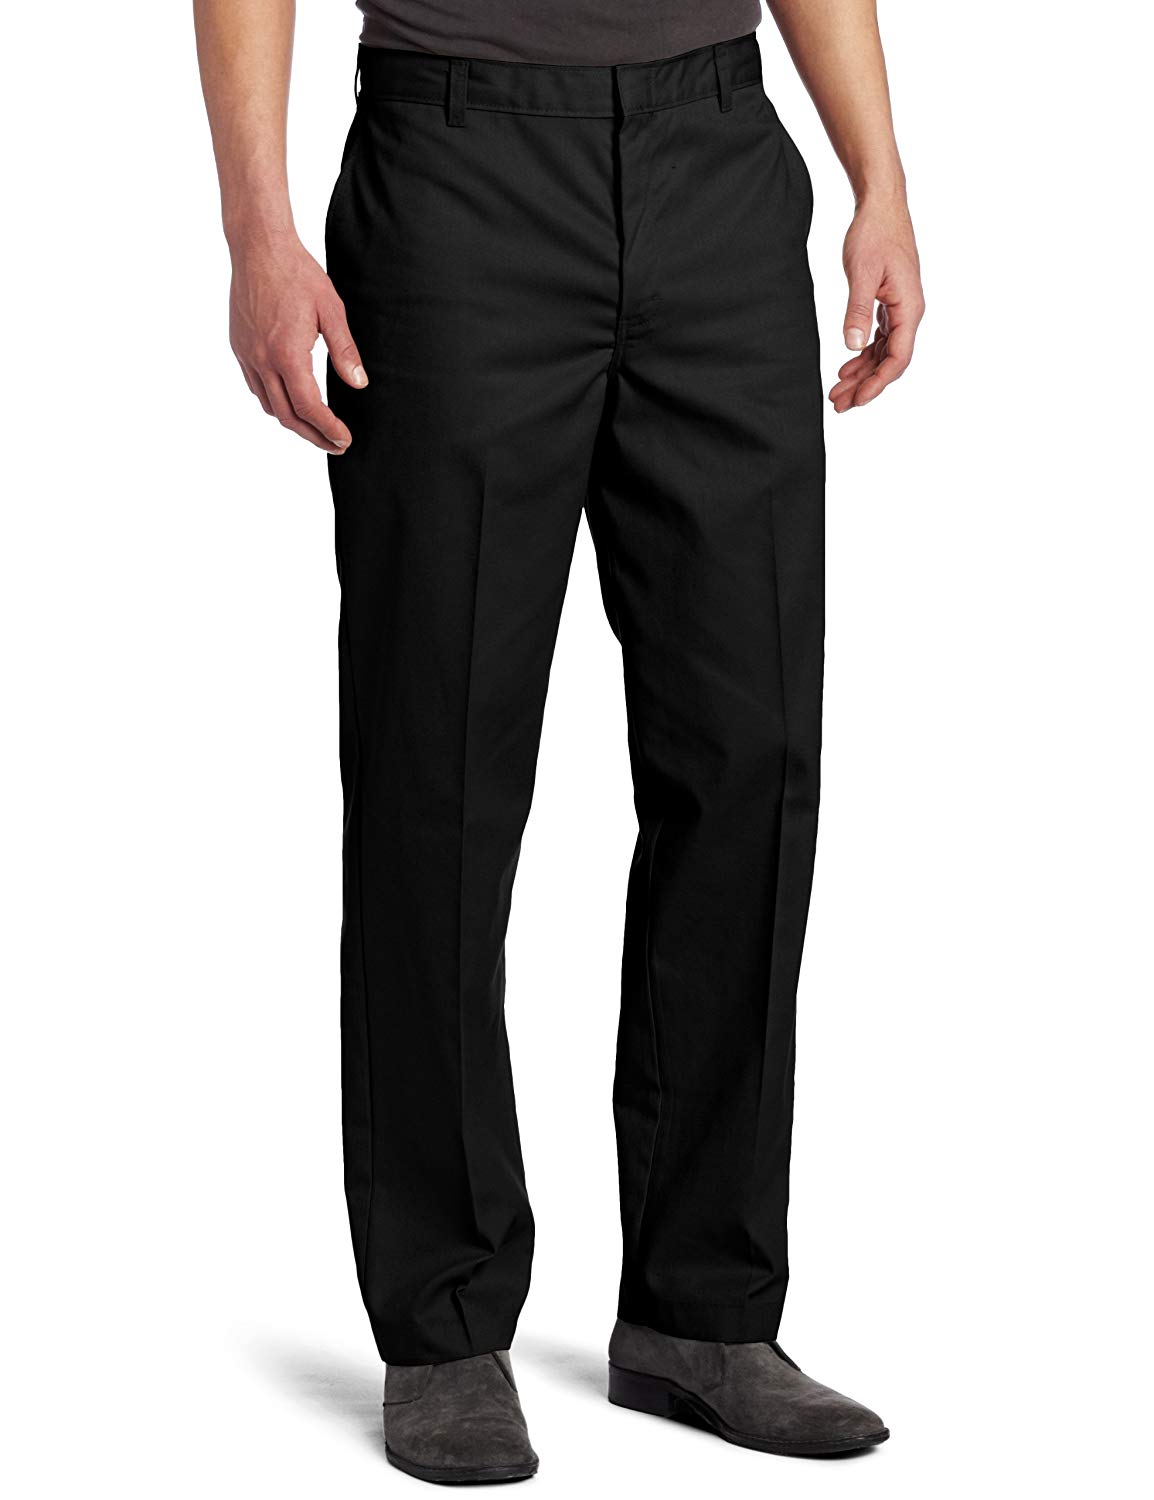 Dickies Men's Flat-Front Pant Stain & Wrinkle Resistant Cotton/Poly